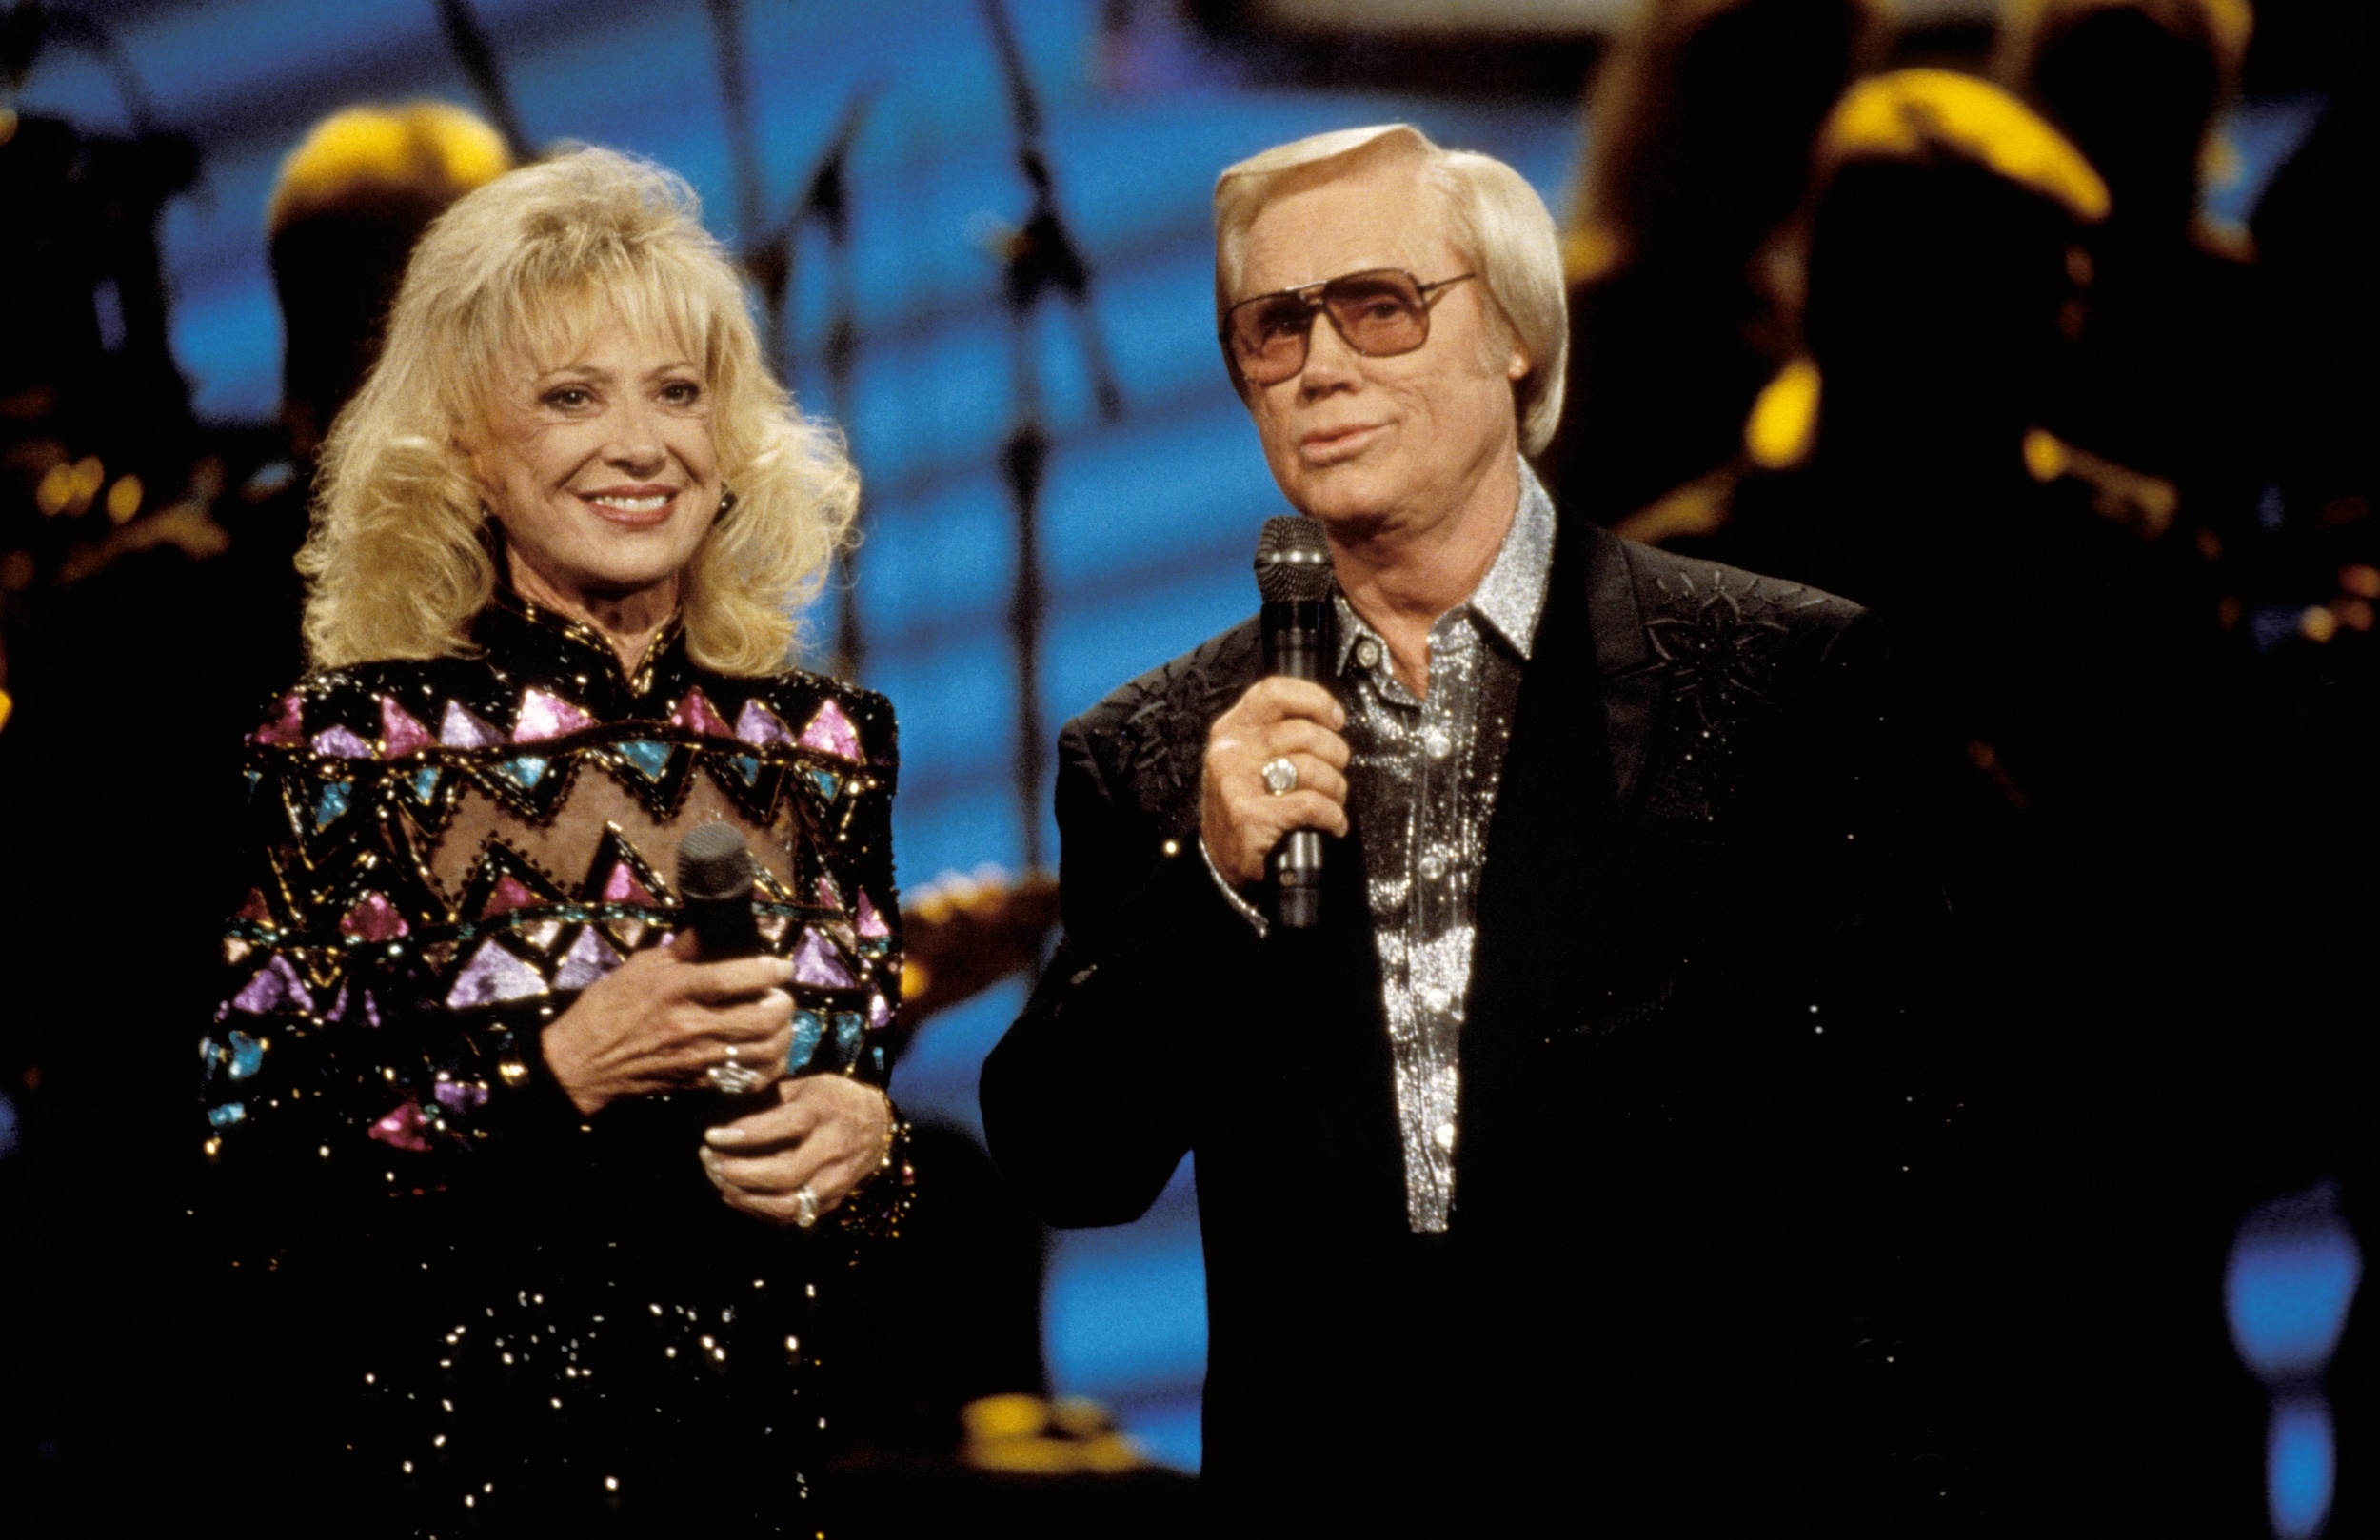 <p>This legendary duet between then-couple Tammy Wynette and George Jones was a #1 hit in 1976 and remains one of the genre's finest vocal duets. It also offered a bit of a peek inside the duo's tumultuous marriage, which ended one year prior. </p>